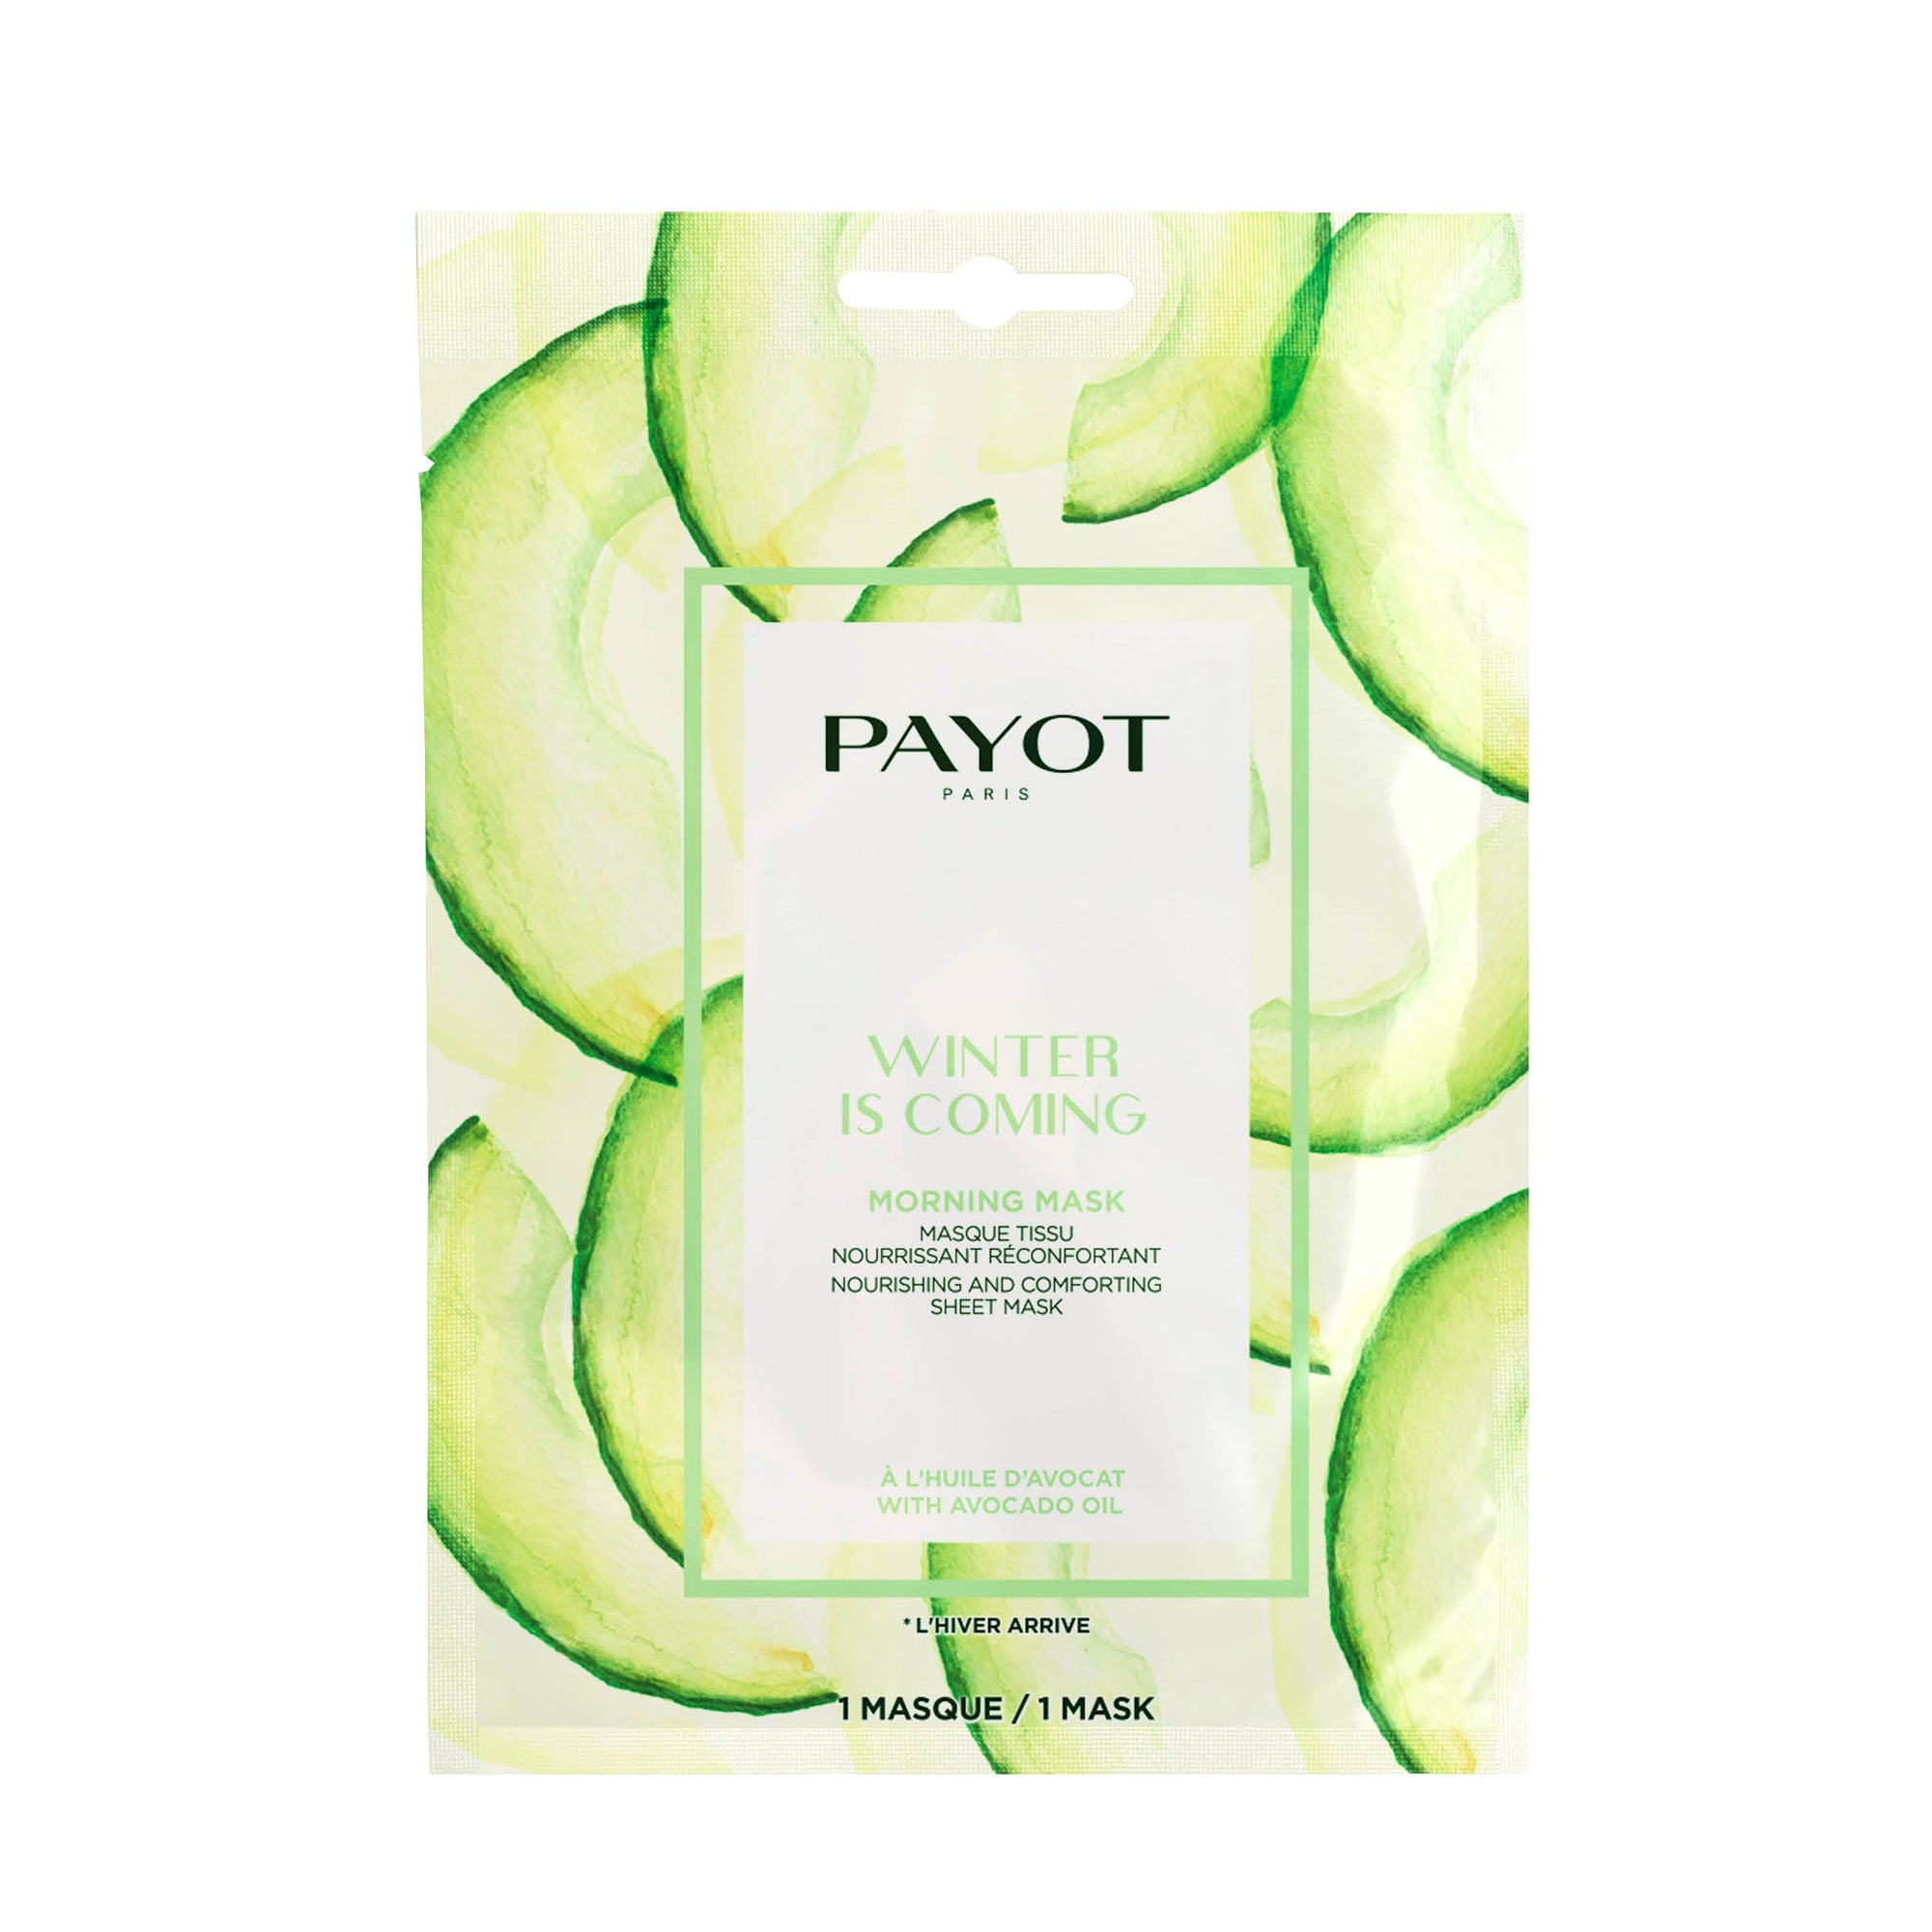 Payot Winter is Coming Nourishing & Comforting Morning Mask